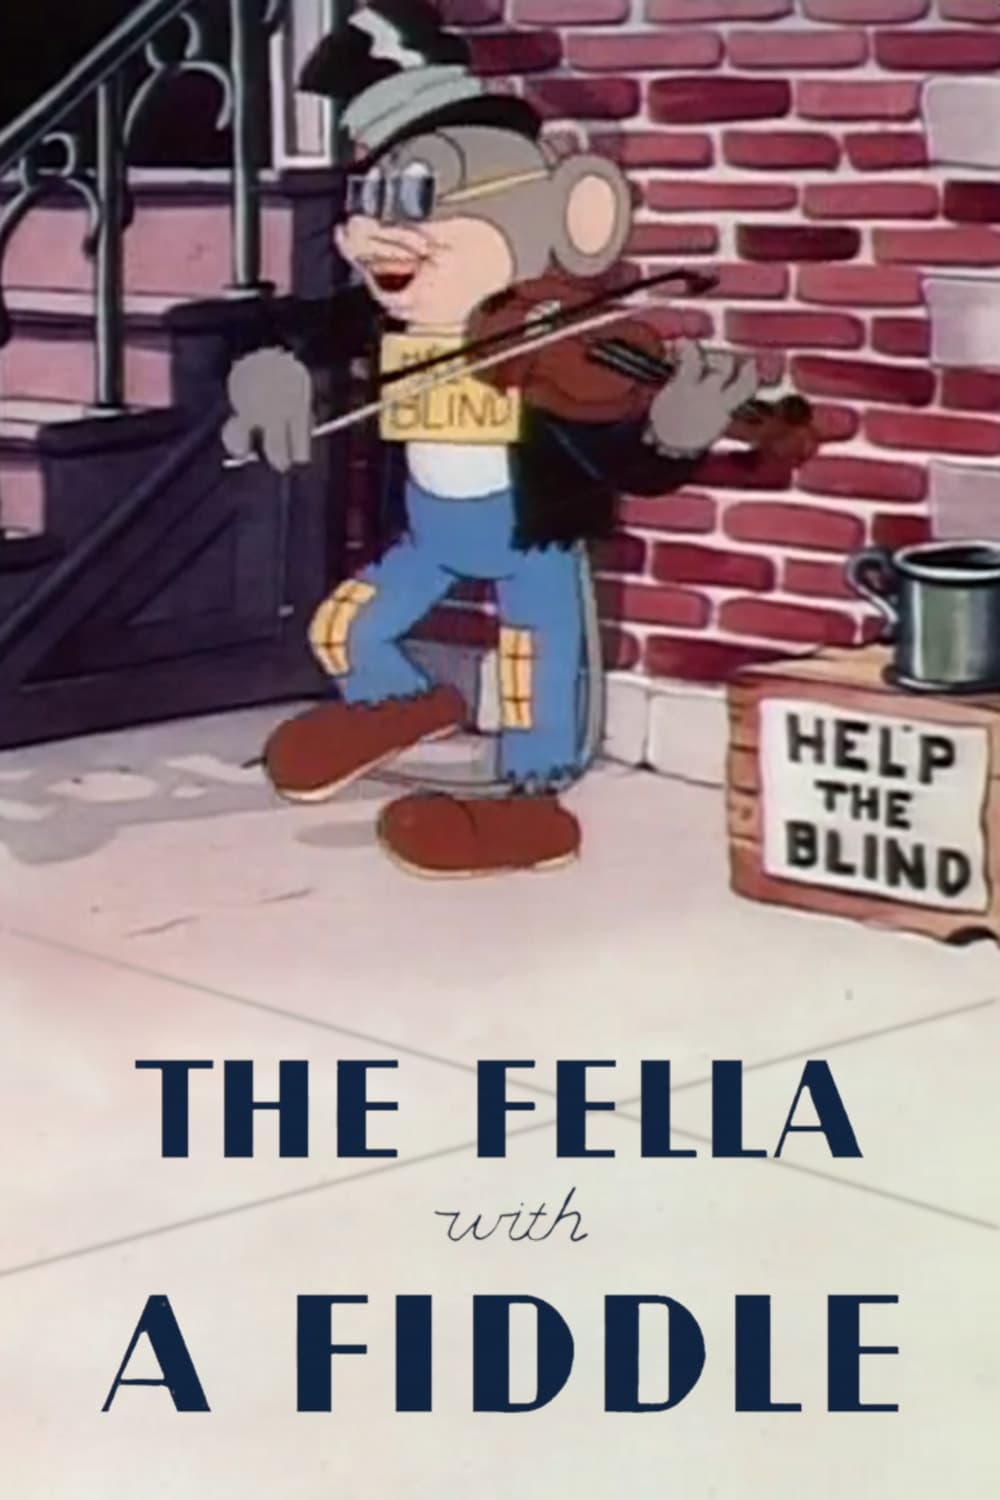 The Fella with a Fiddle (1937)